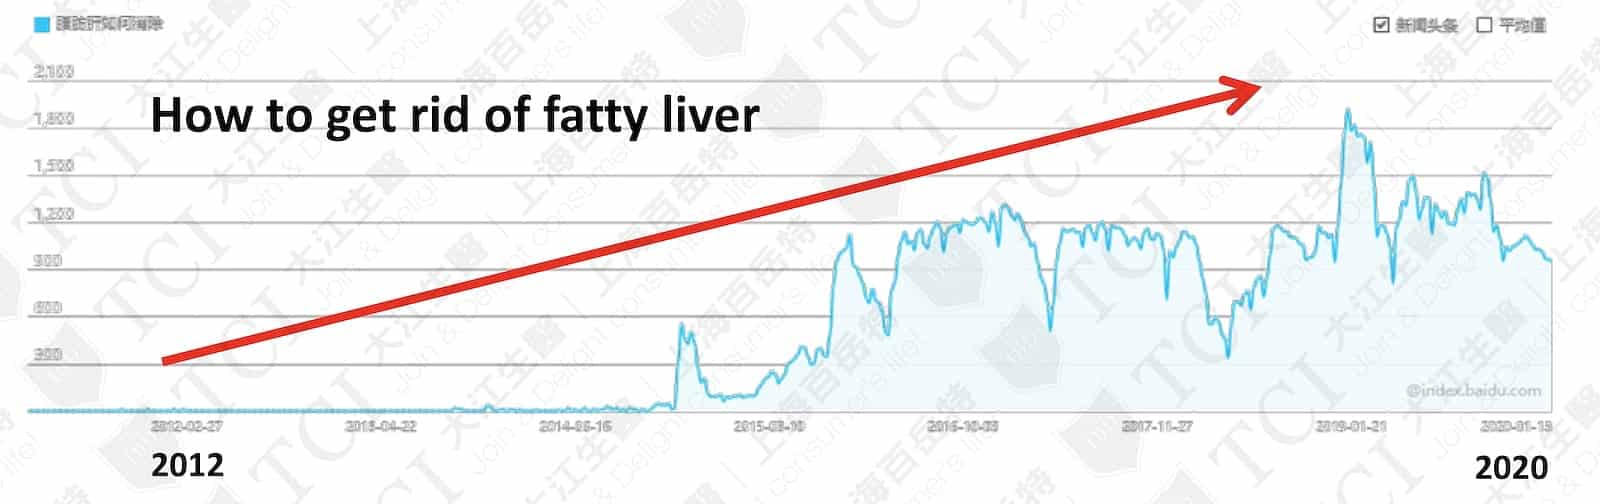 Search Volume of “How to Get Rid of Fatty Liver” / Data Source: Baidu Index